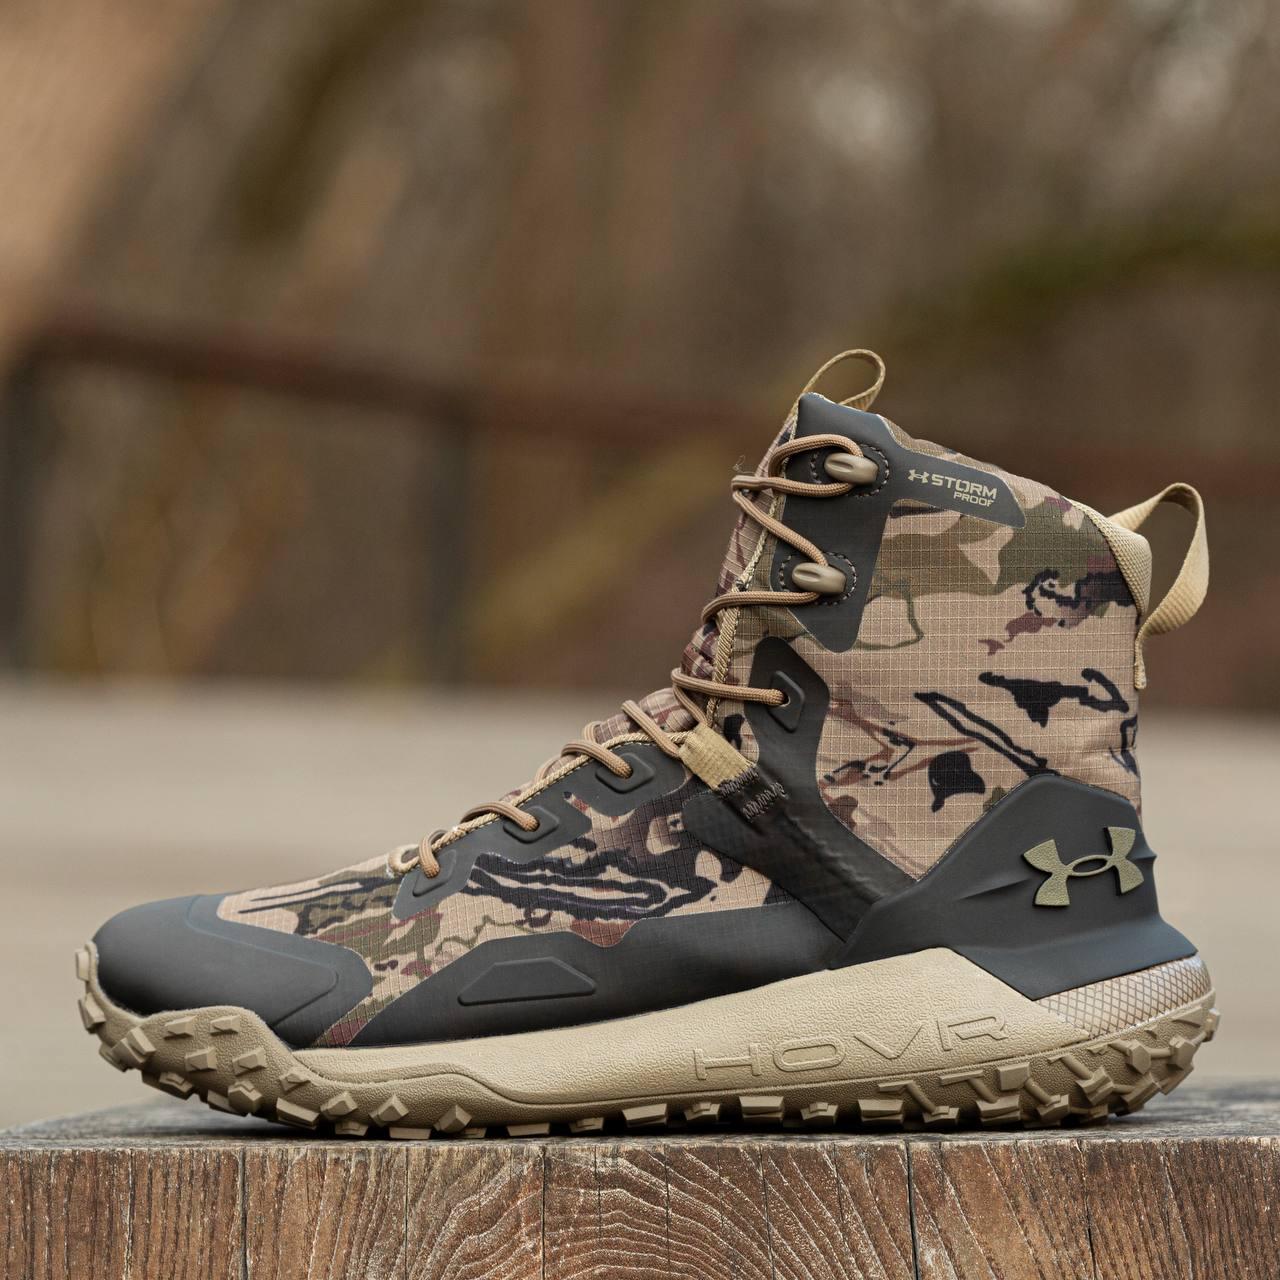 Under Armour HOVR™ Dawn WP Boots